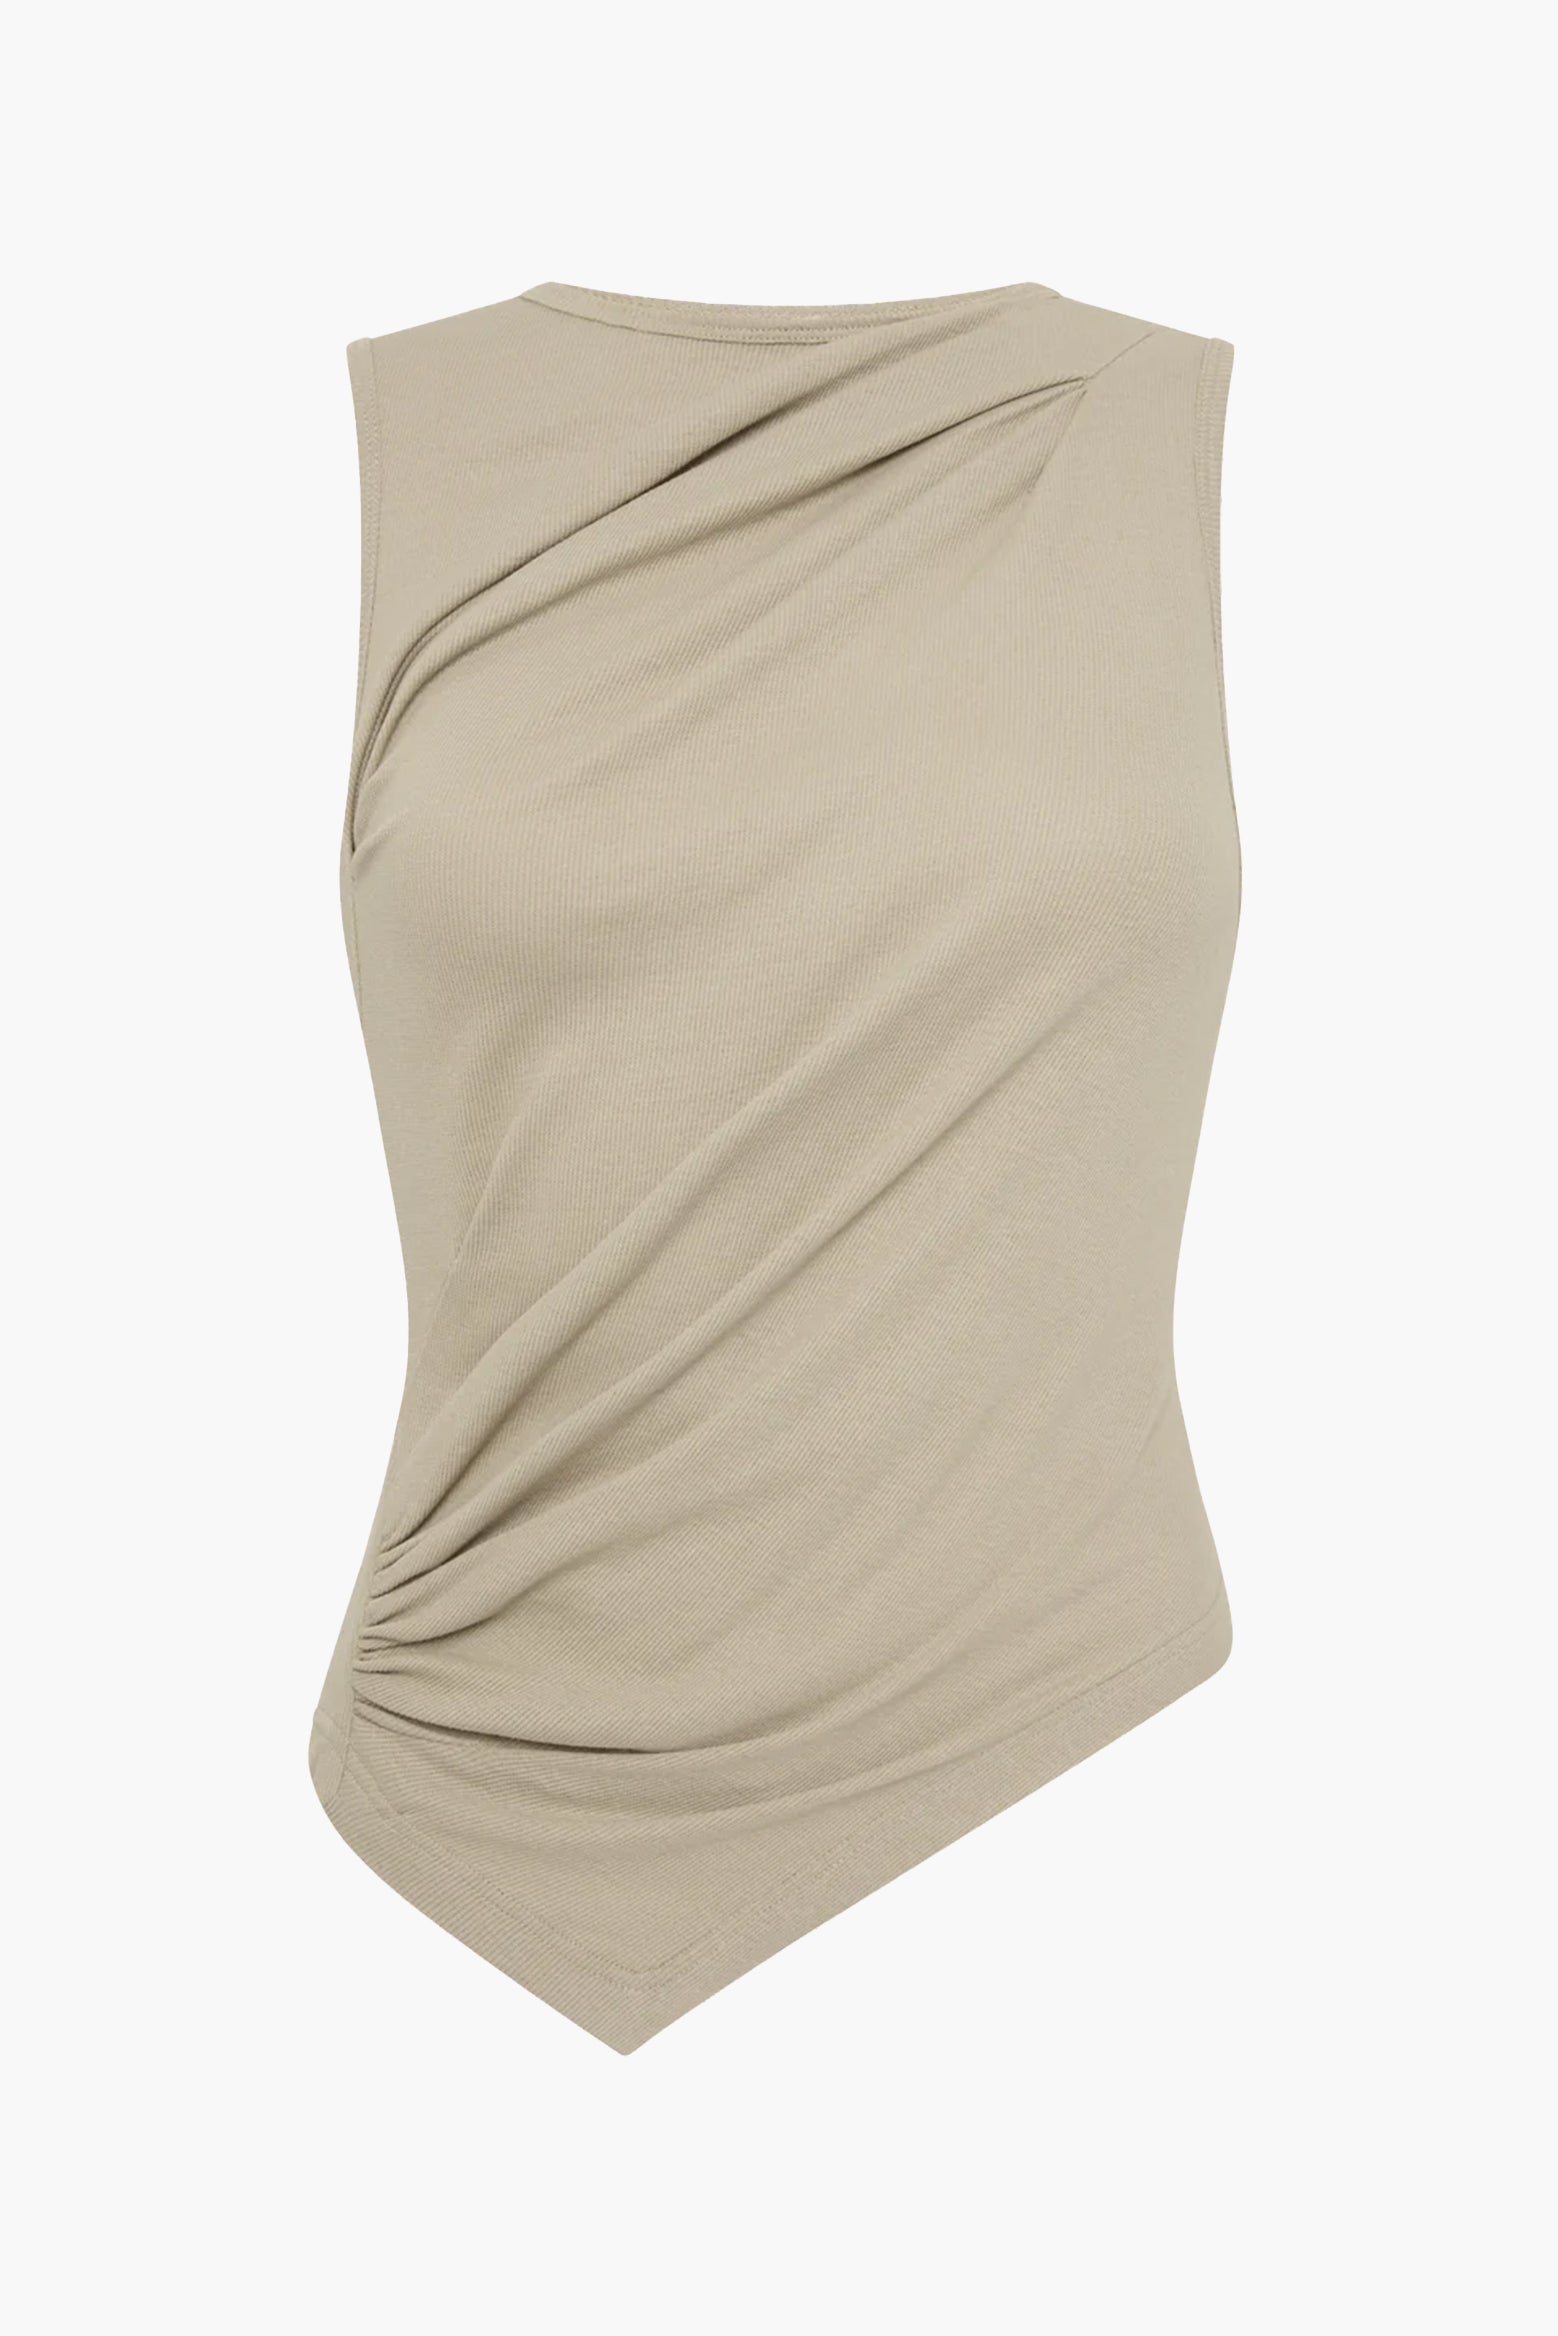 FAITHFULL THE BRAND Loire Top in Taupe | The New Trend